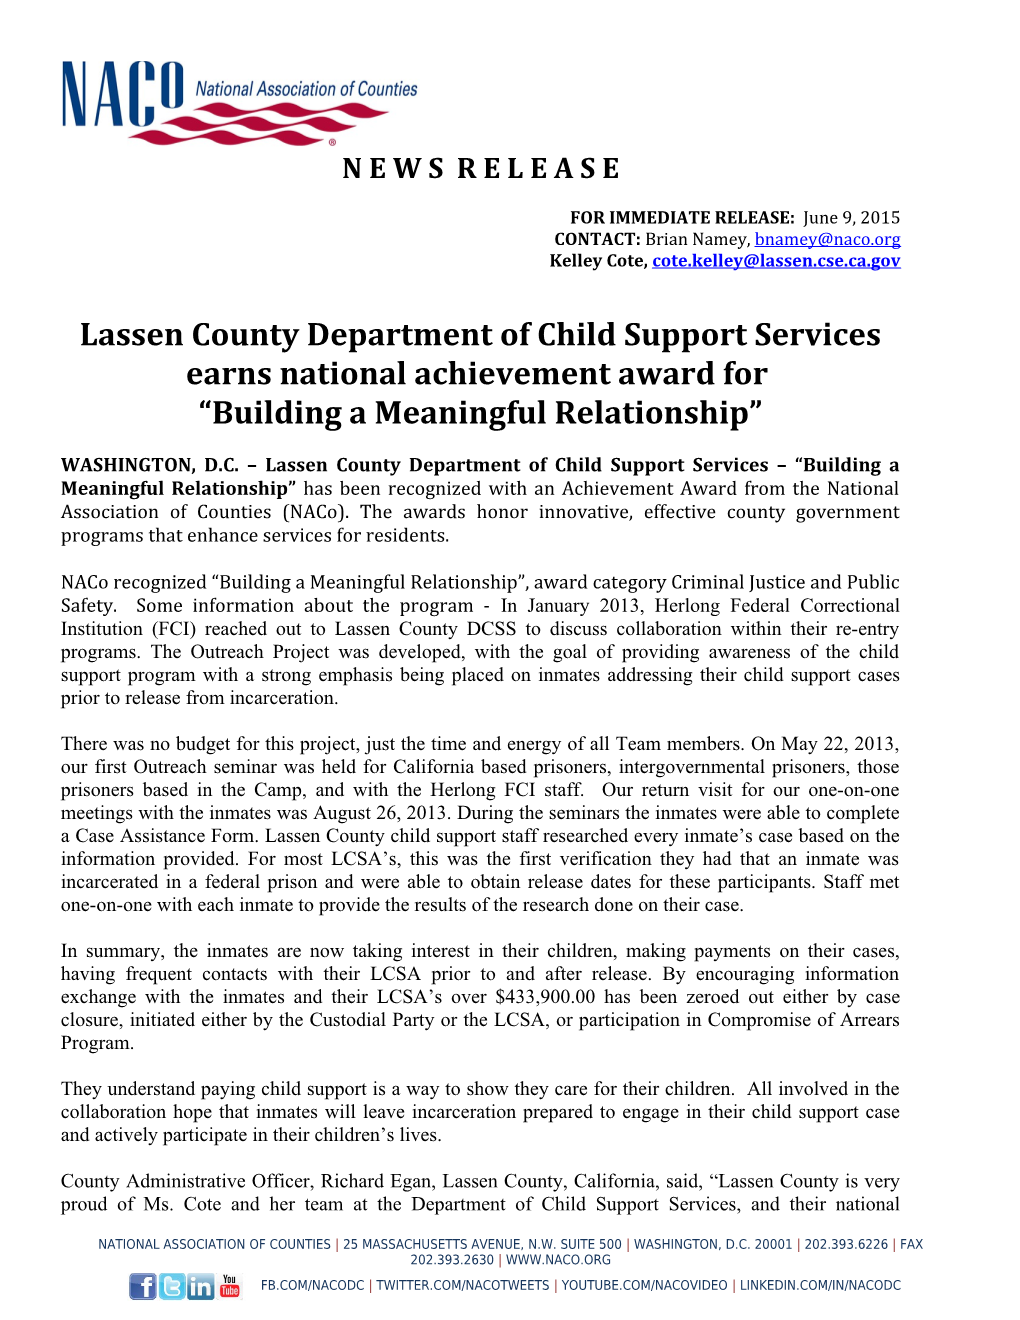 Lassen County Department of Child Support Services Earns National Achievement Award For